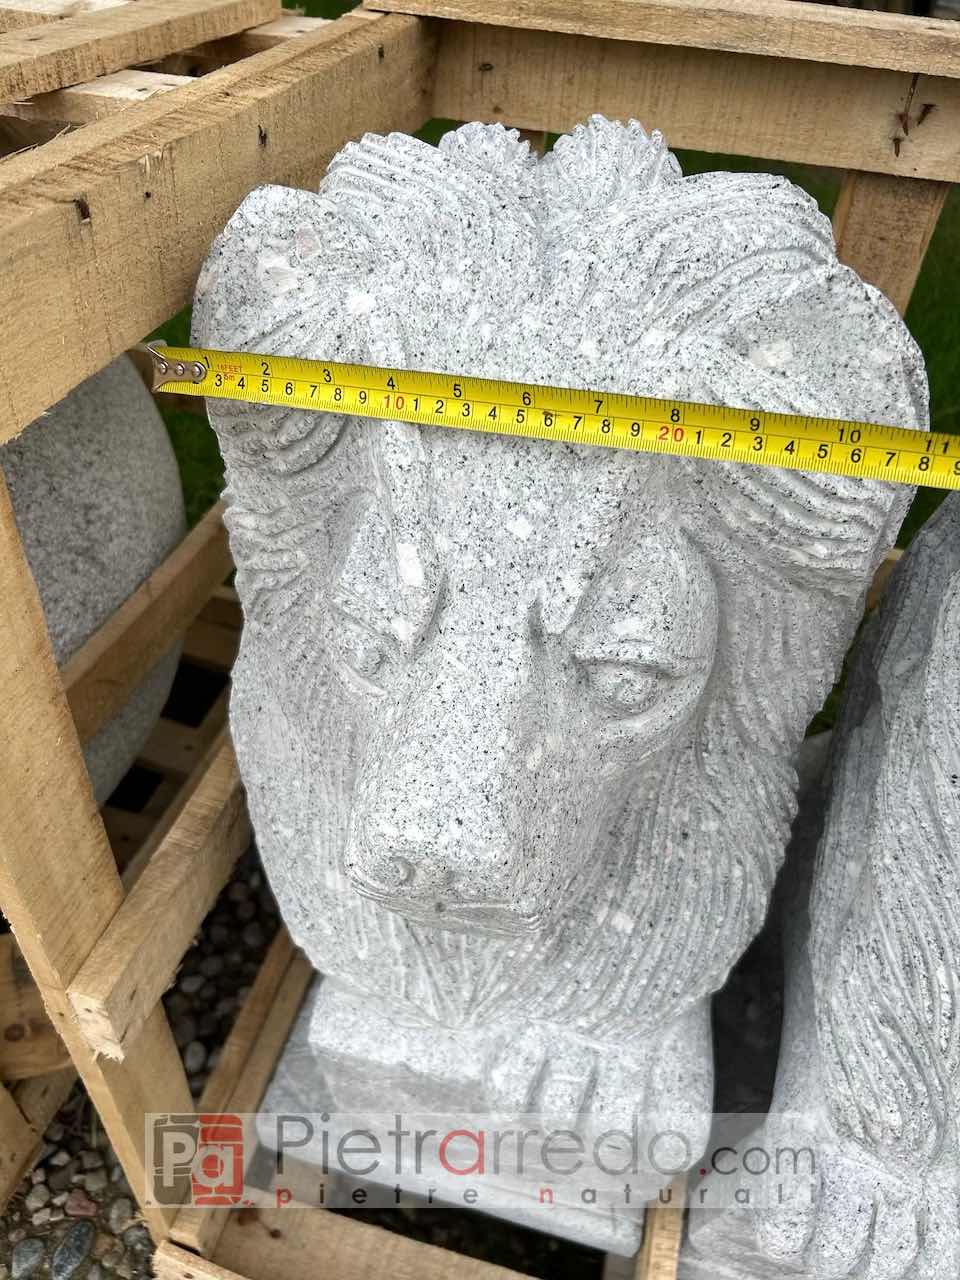 Sitting lion in hand-carved granite pietrarredo stone garden offers for sale